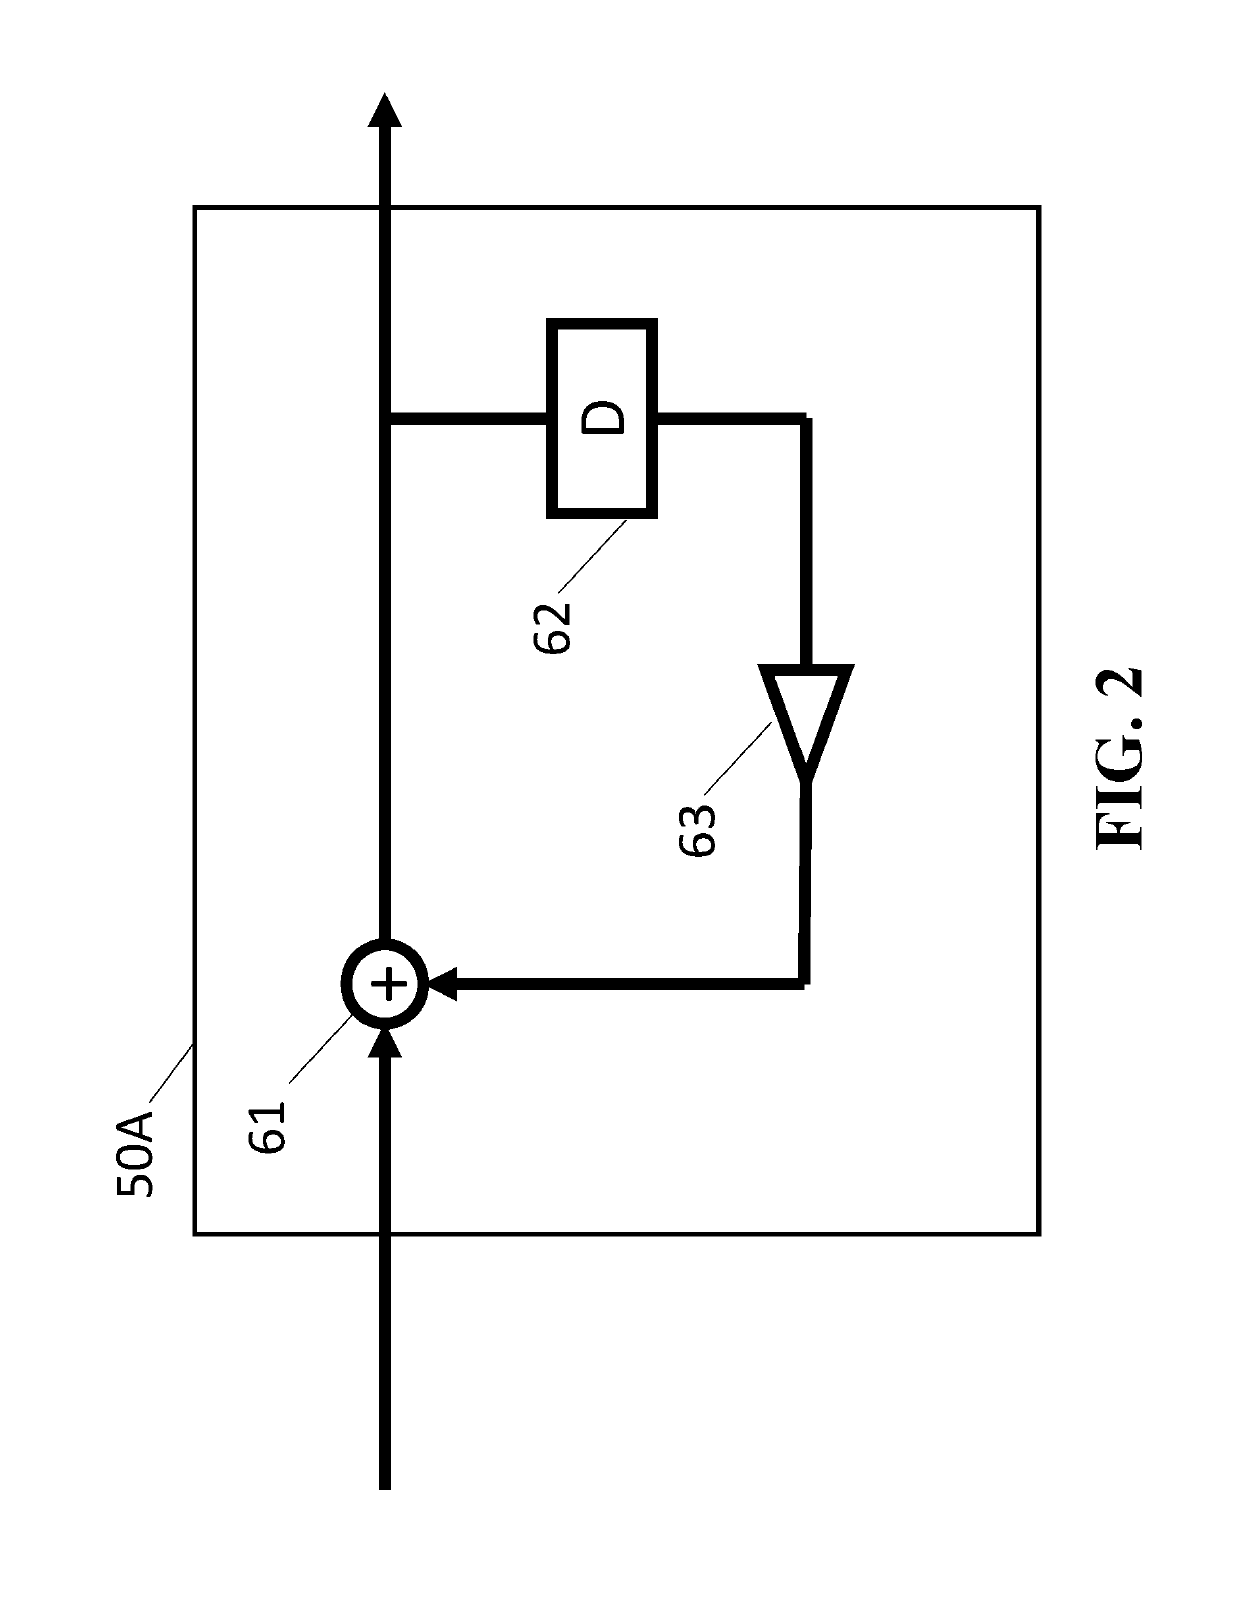 Optical Ring Circuit with Electrical Filter